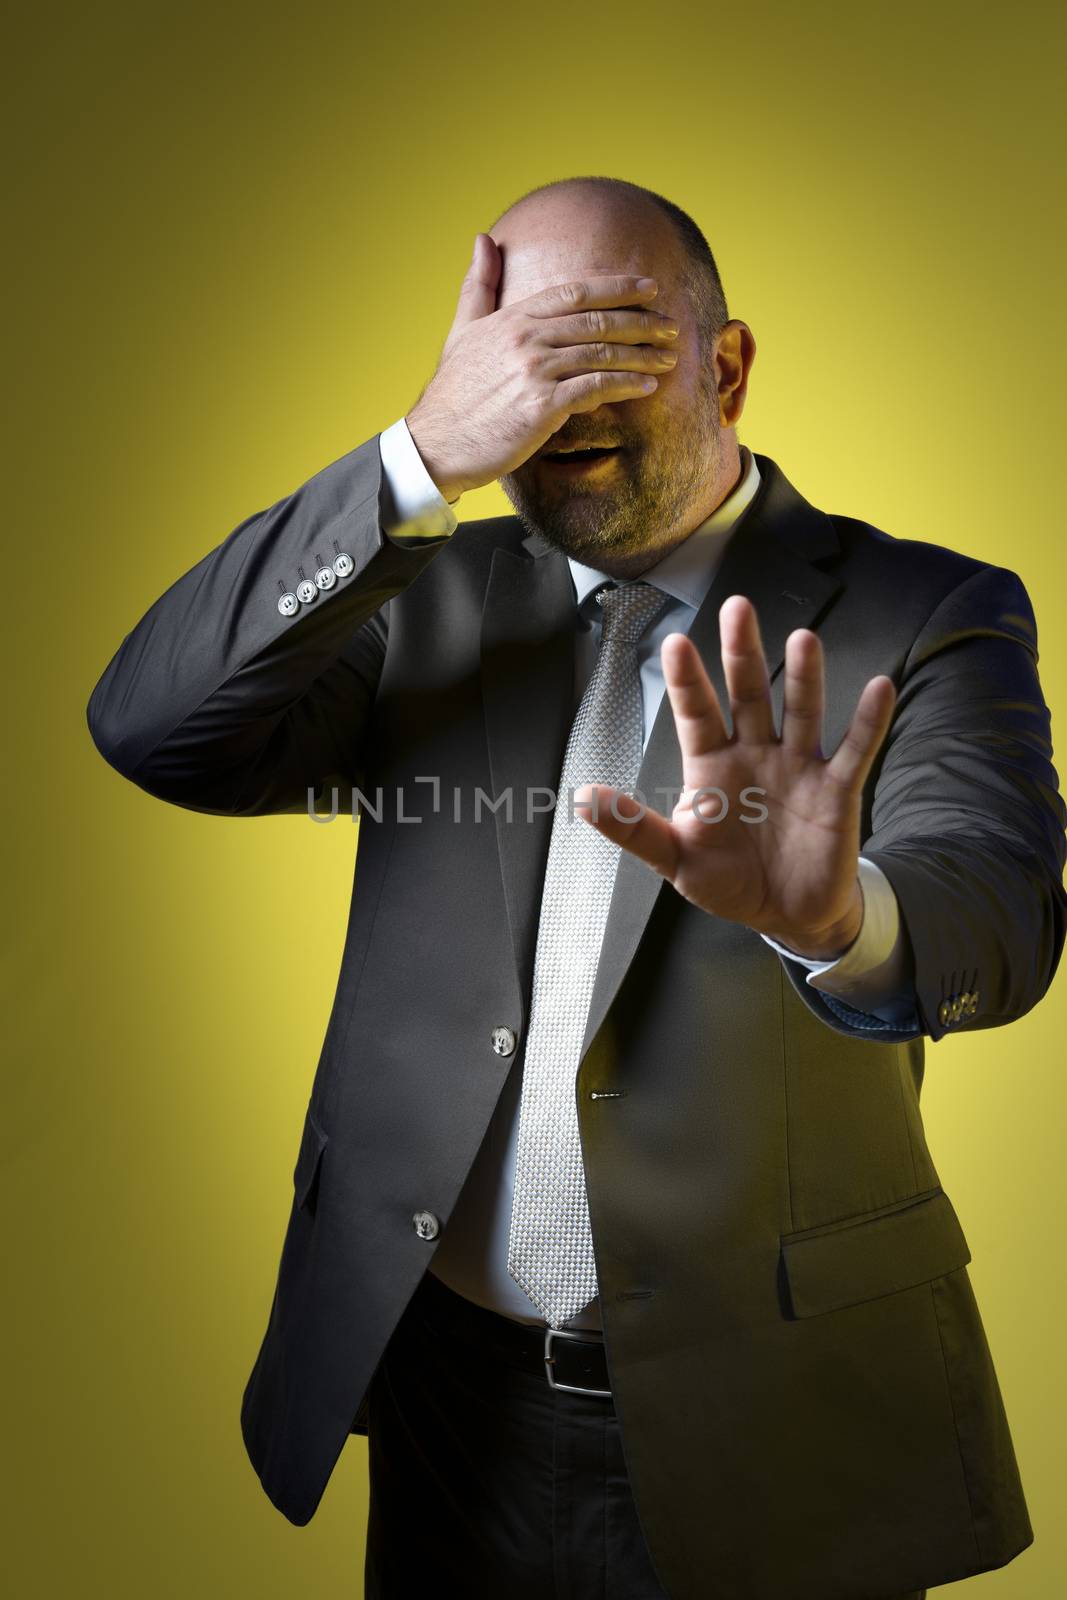 Stressed businessman in dark suit holding up hand in front of his eyes and parries with the other hand, against yellow background